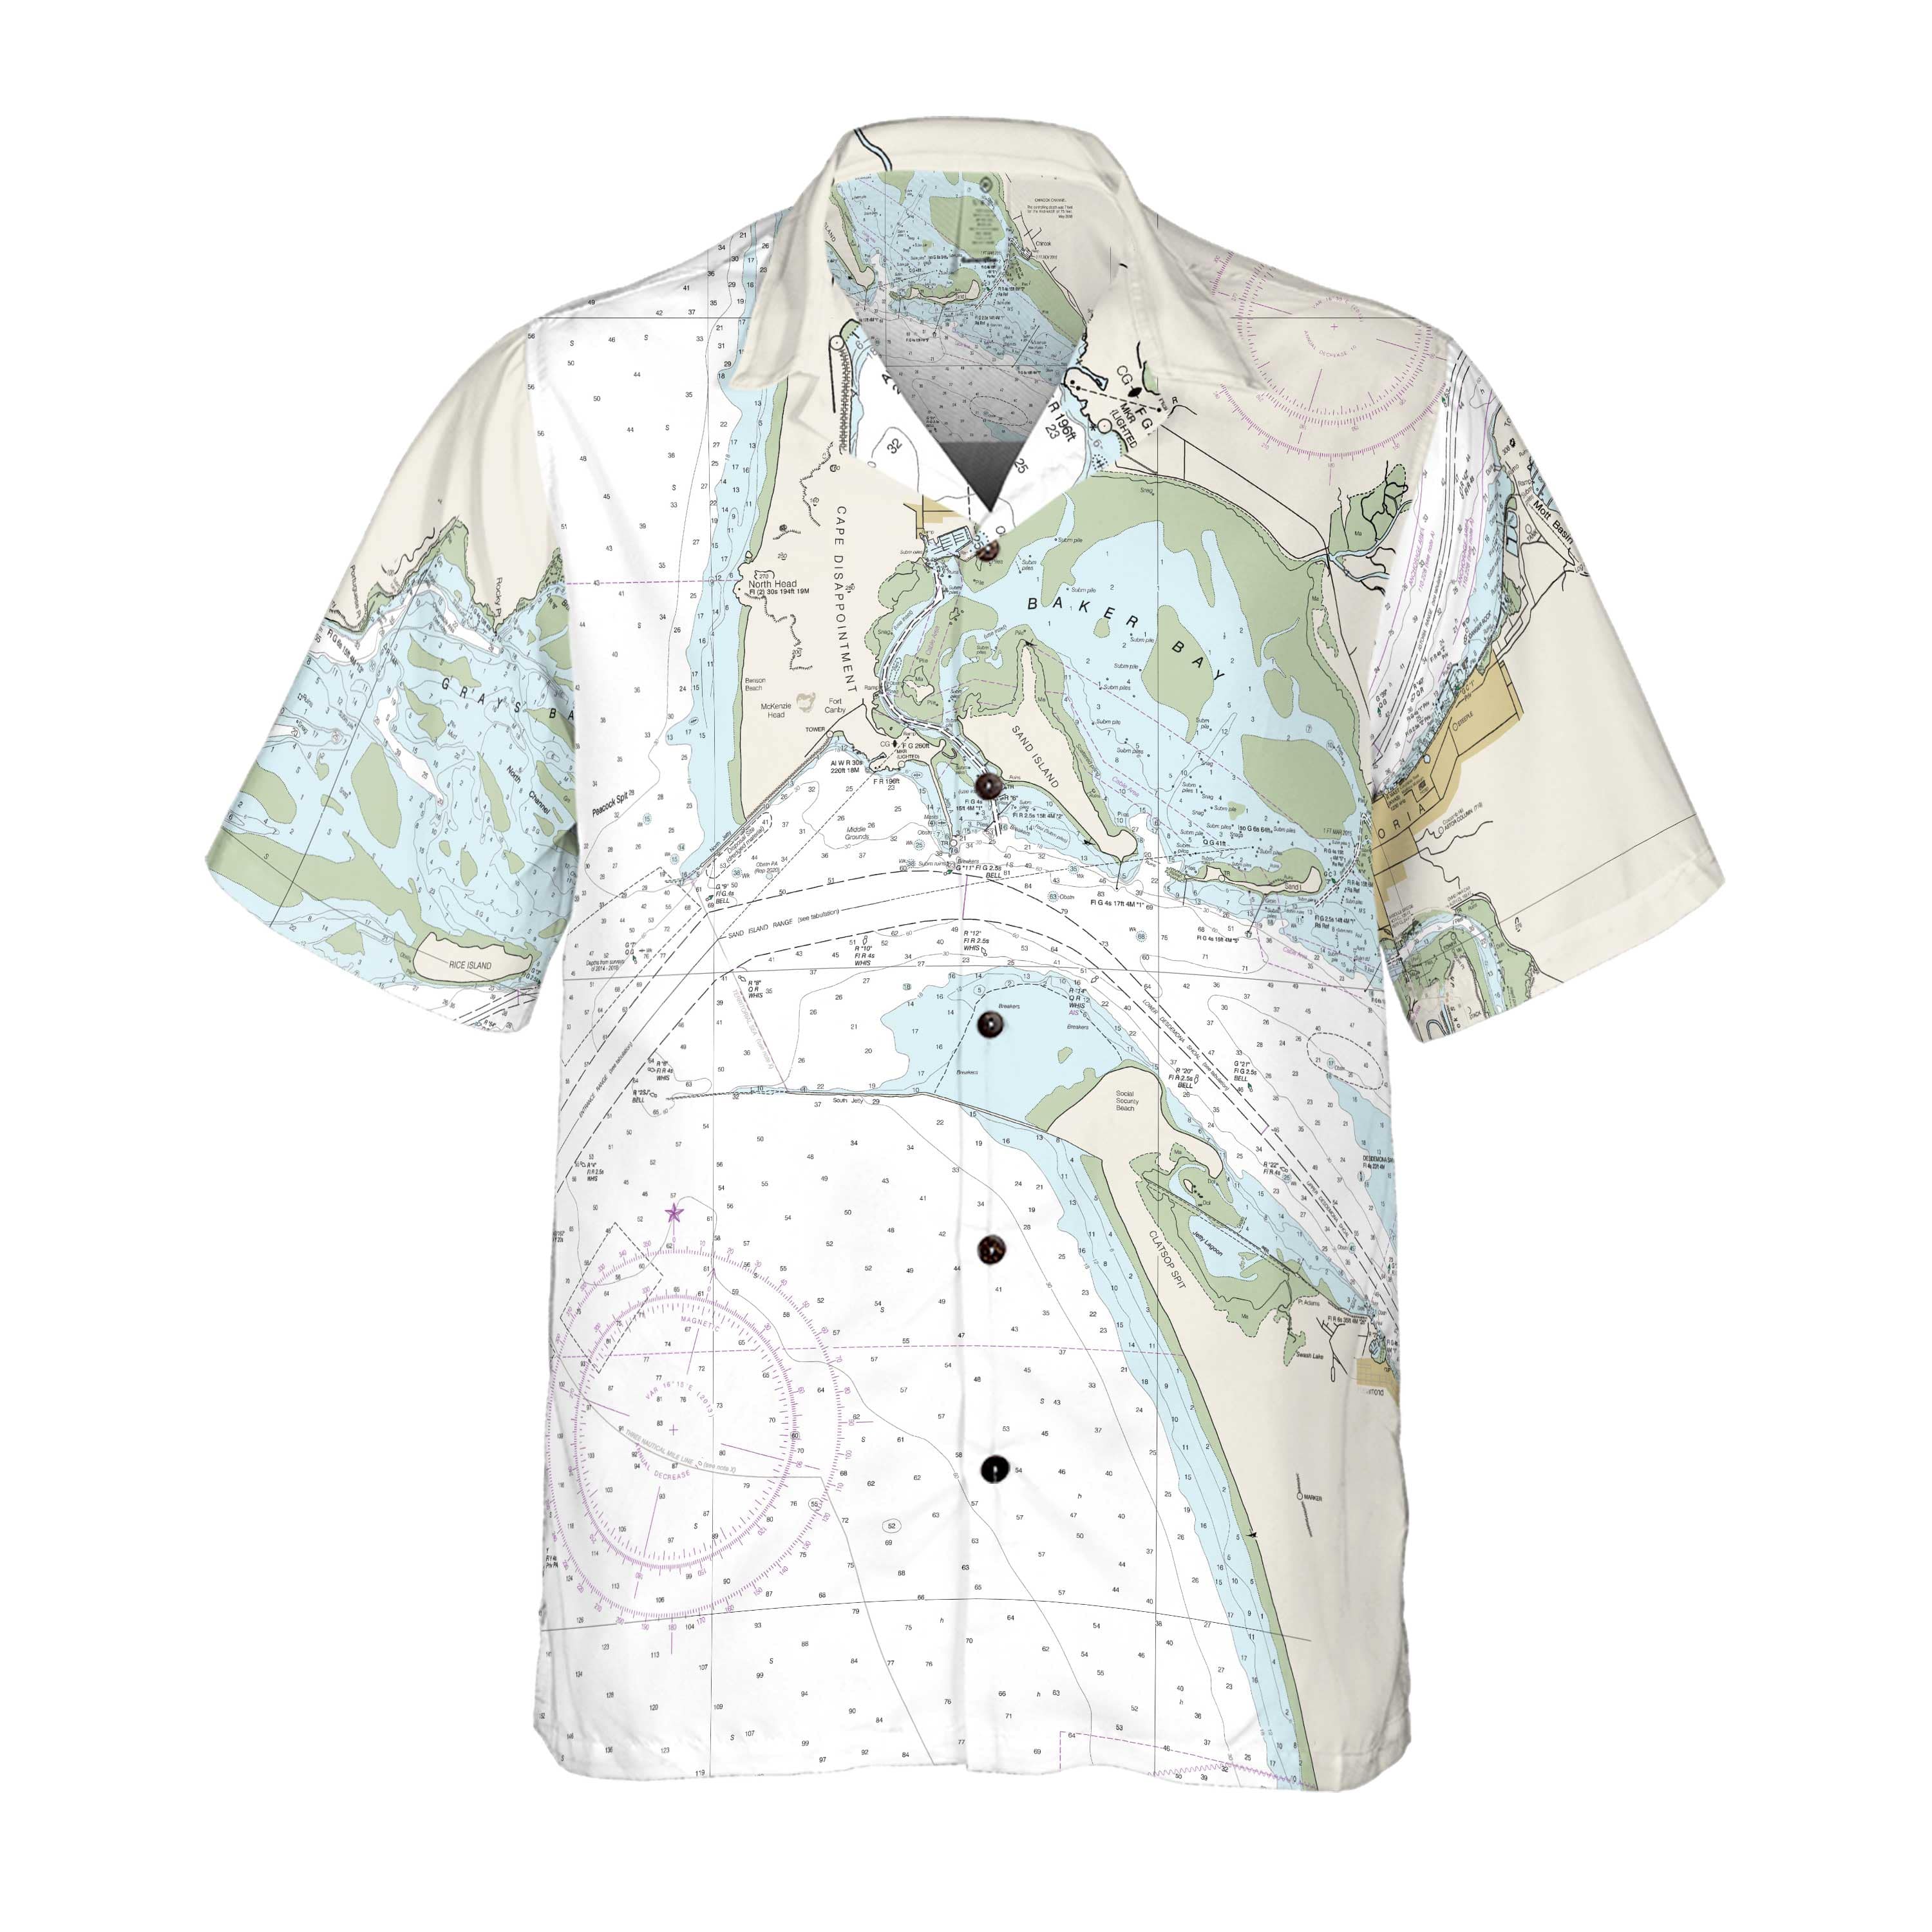 The Cape Disappointment Coconut Button Camp Shirt